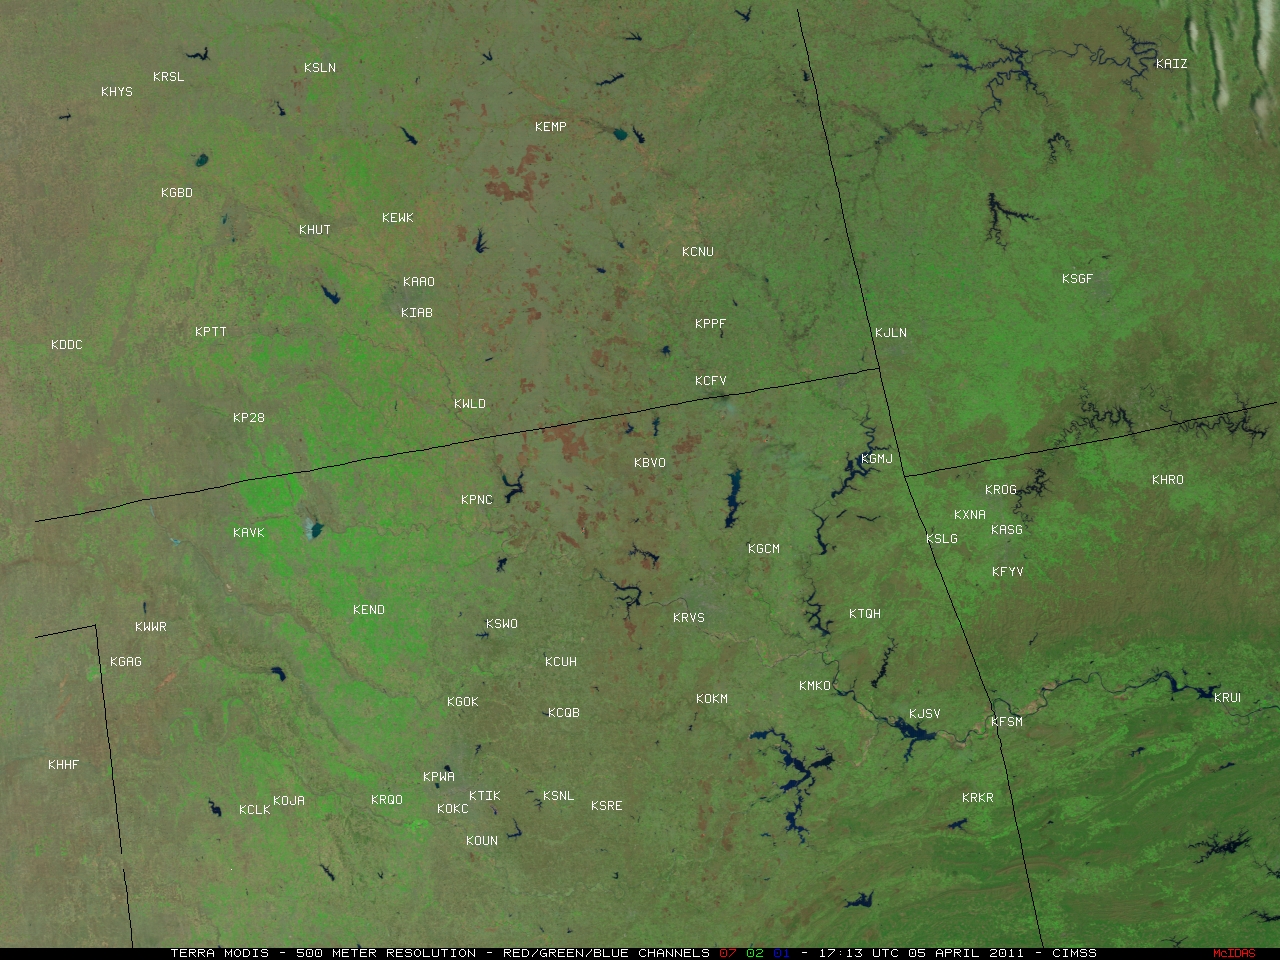 MODIS Red/Green/Blue (RGB) image, created using Bands 07/02/01